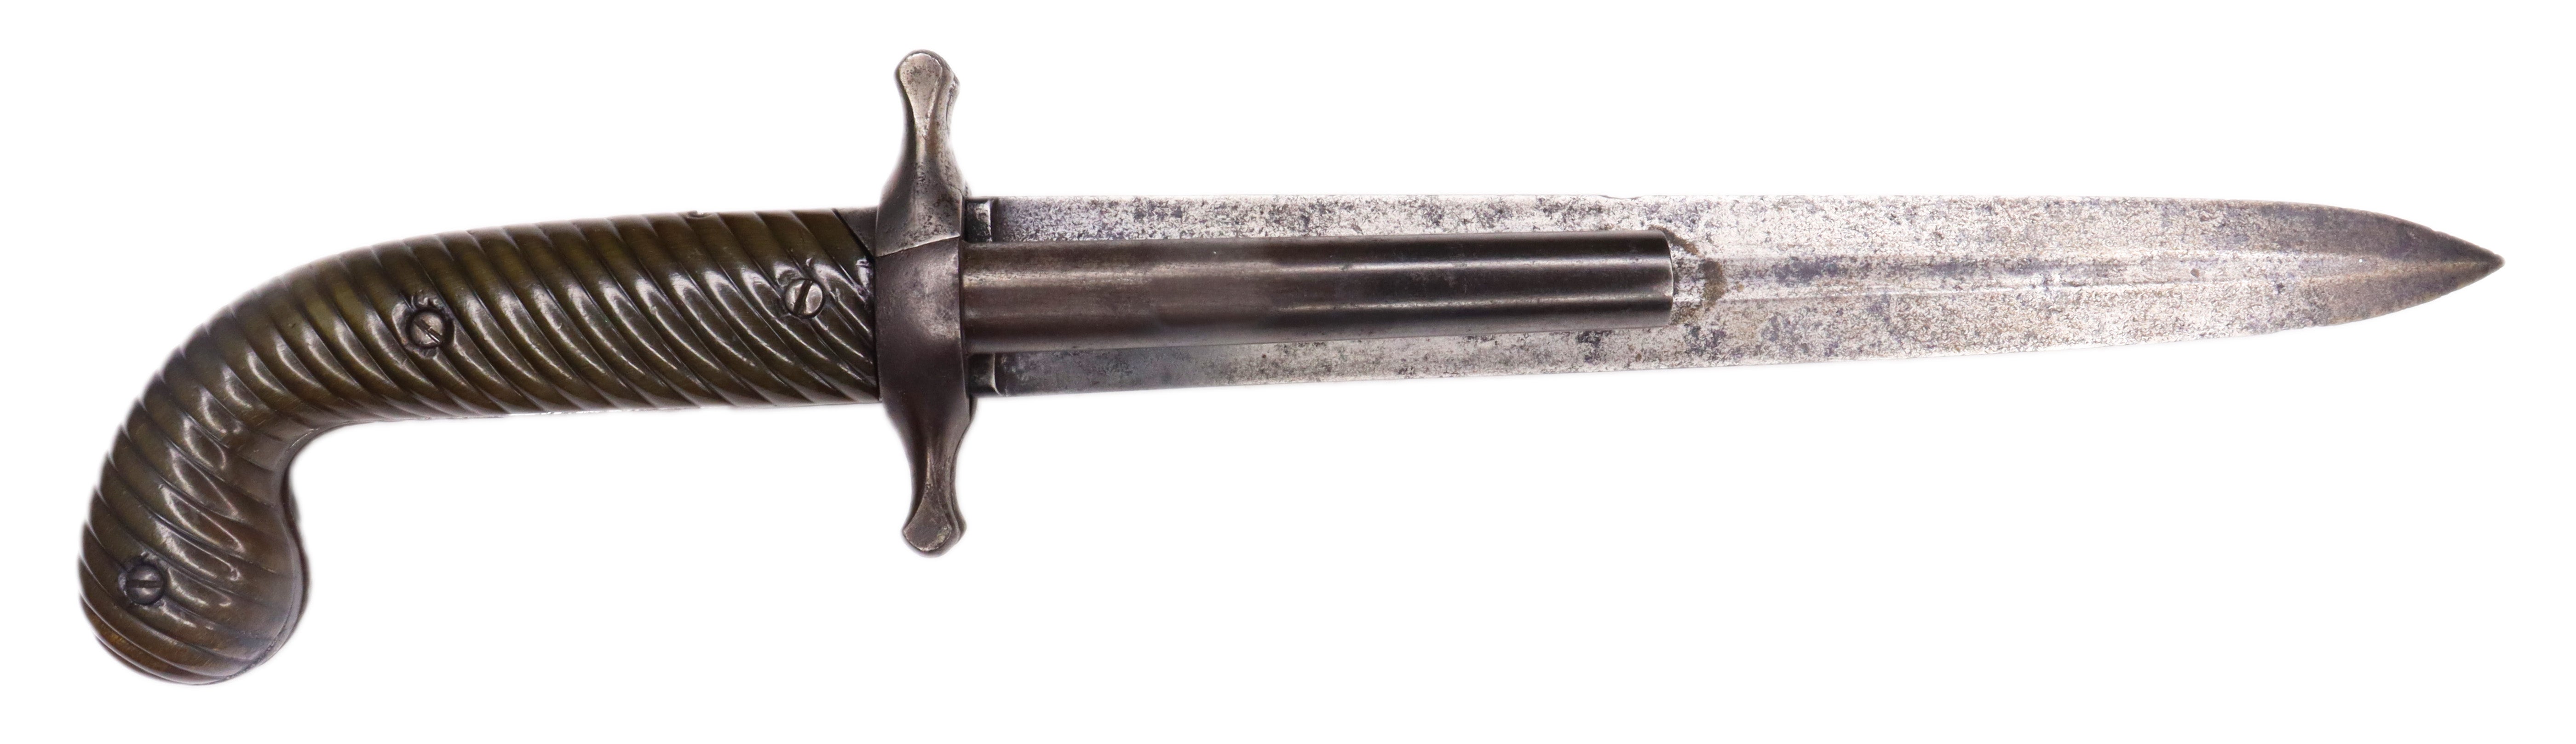 French Double Barrel Hunting Knife Pistol circa 1850